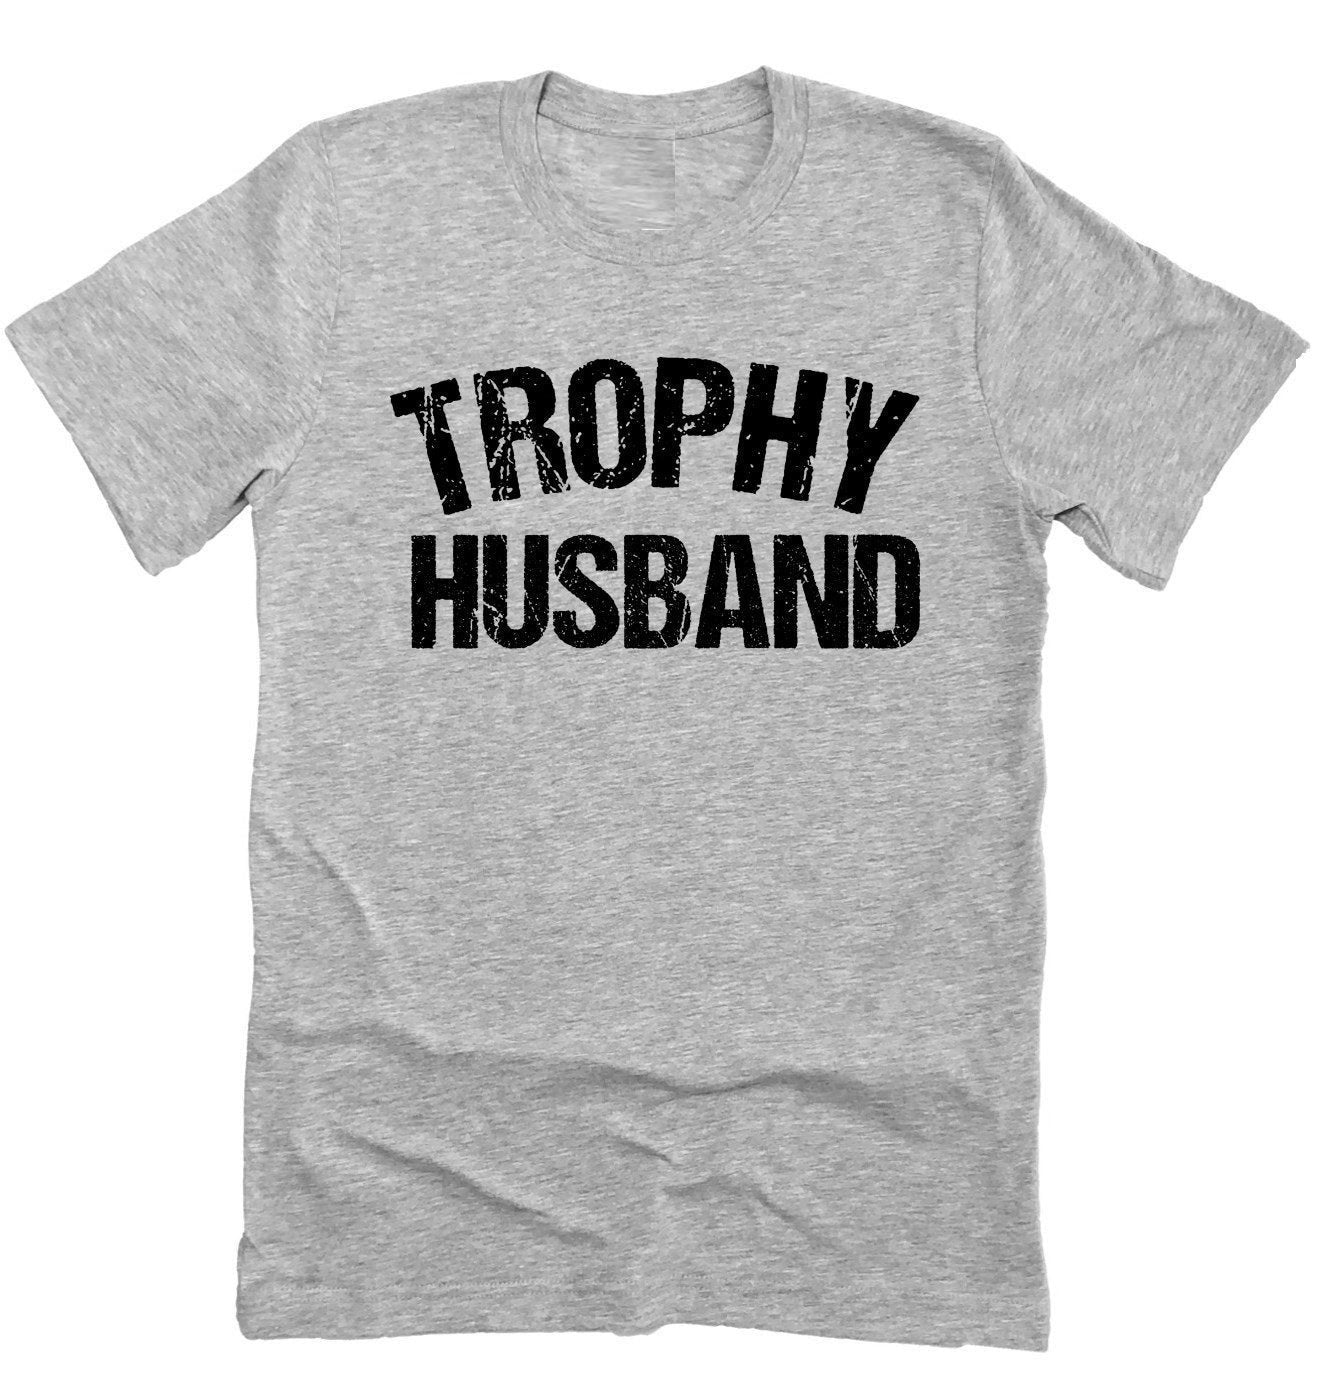 Trophy Husband, Funny Just Married, Honeymoon Shirt, Men&#39;s Just Married Funny Unisex Novelty T-Shirt